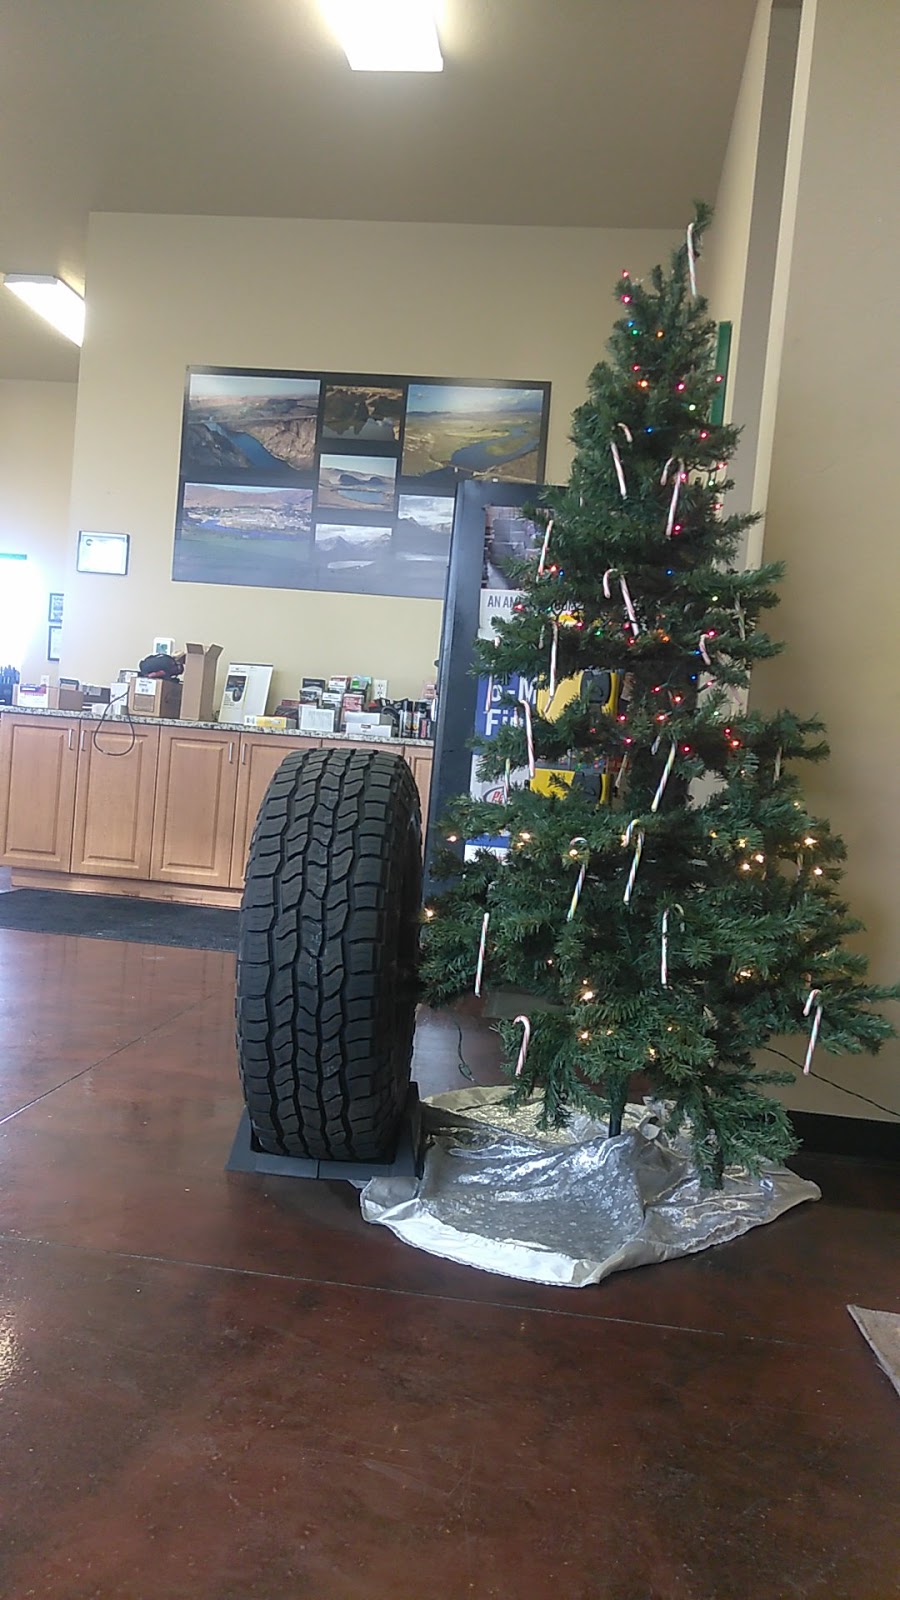 Perfection Tire and Auto Repair | 1400 W Main St, Middleton, ID 83644, USA | Phone: (208) 585-9888